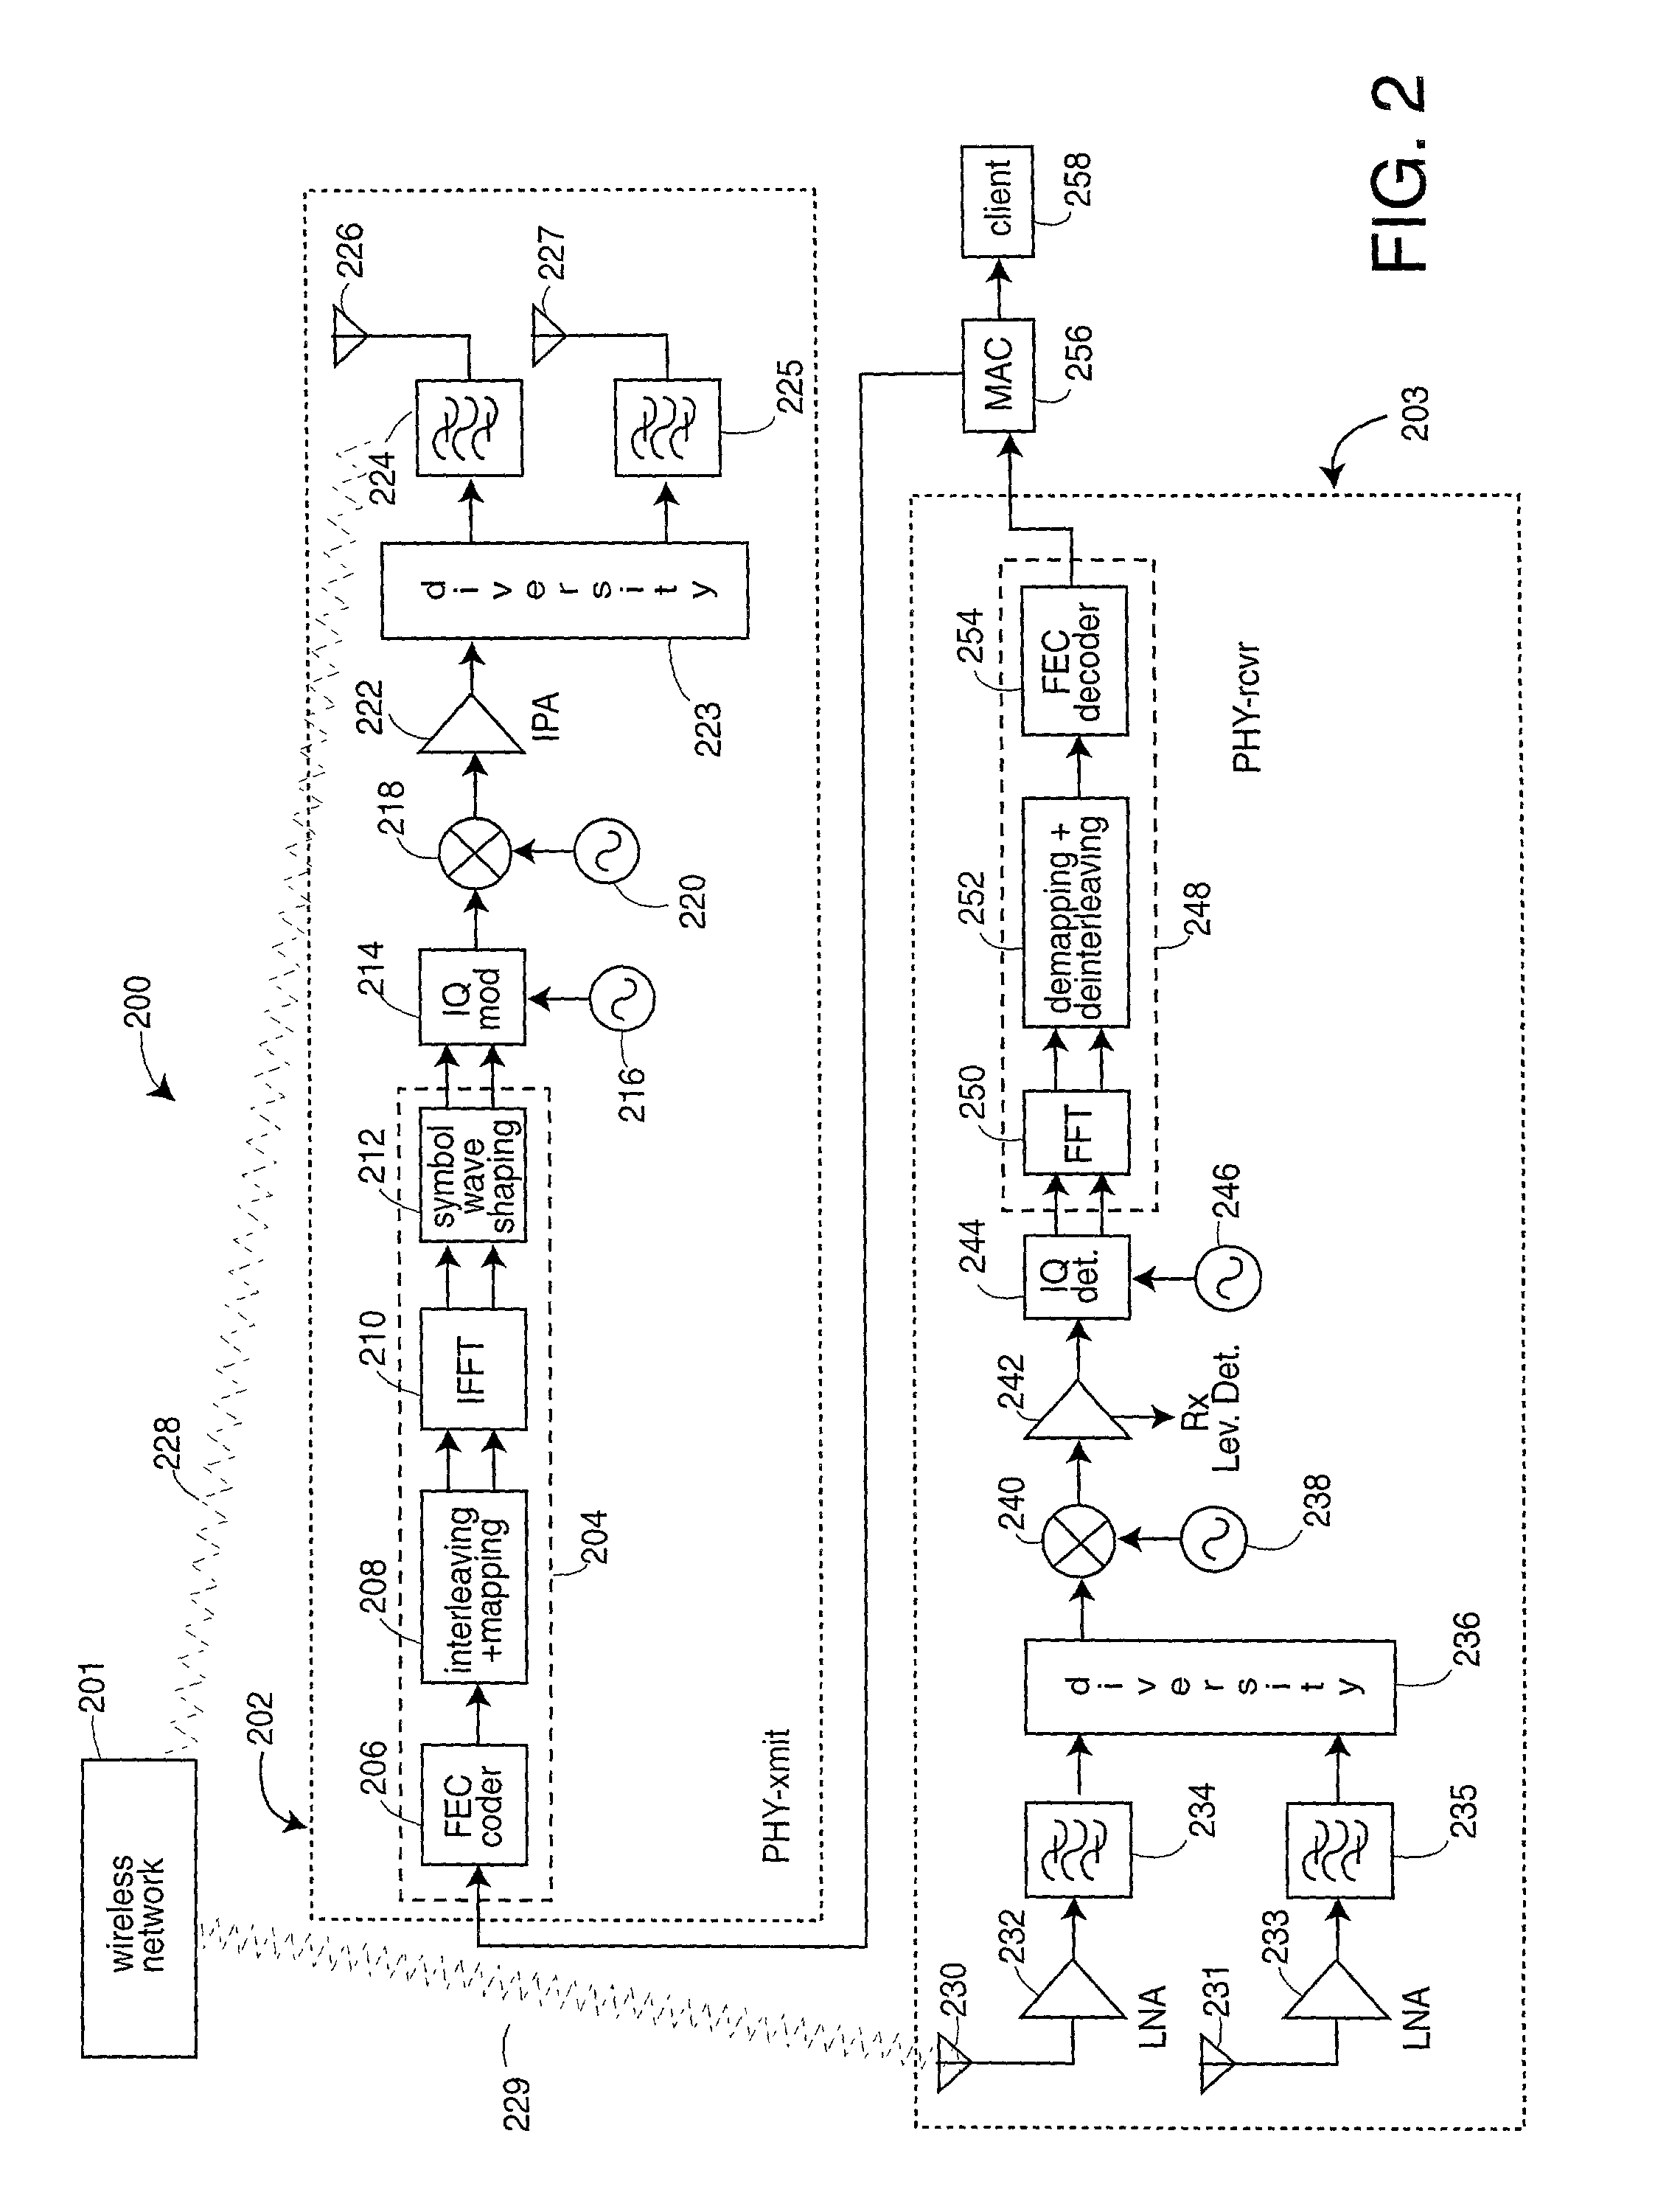 Diversity transceiver for a wireless local area network